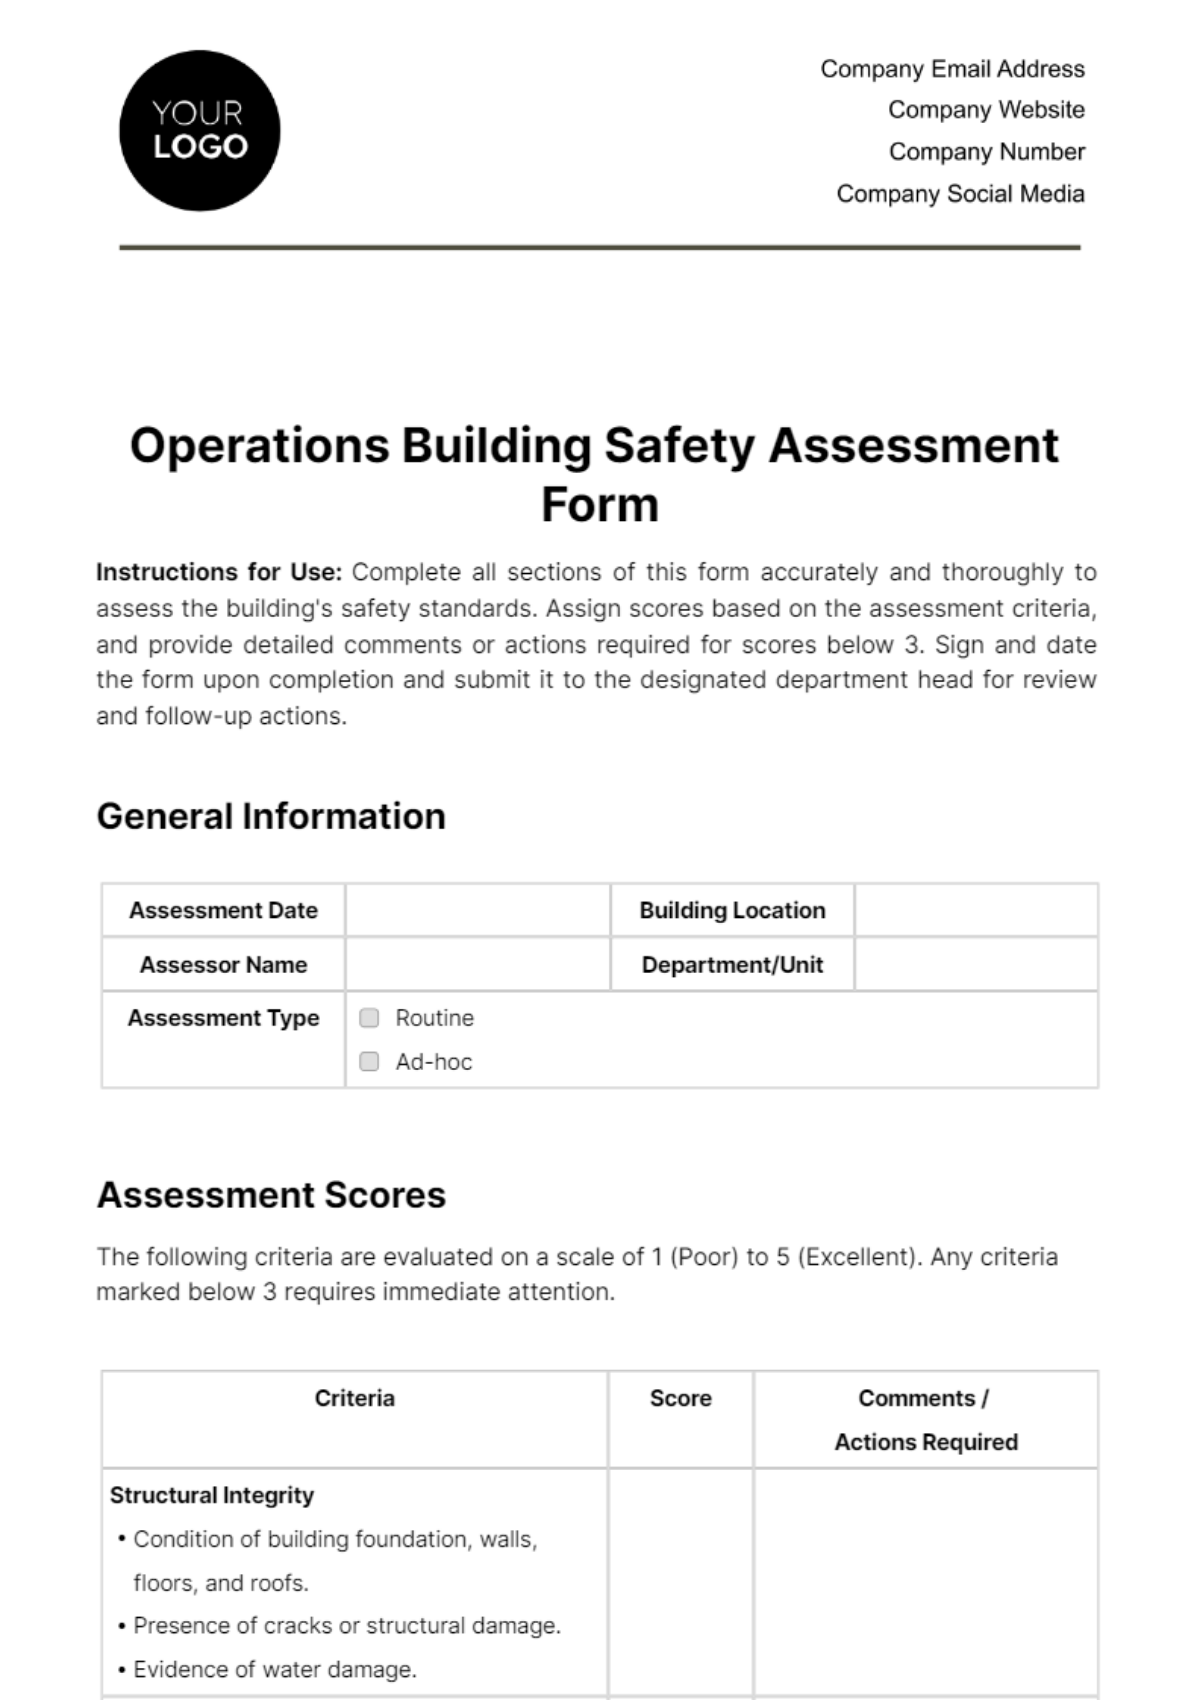 Free Operations Building Safety Assessment Form Template